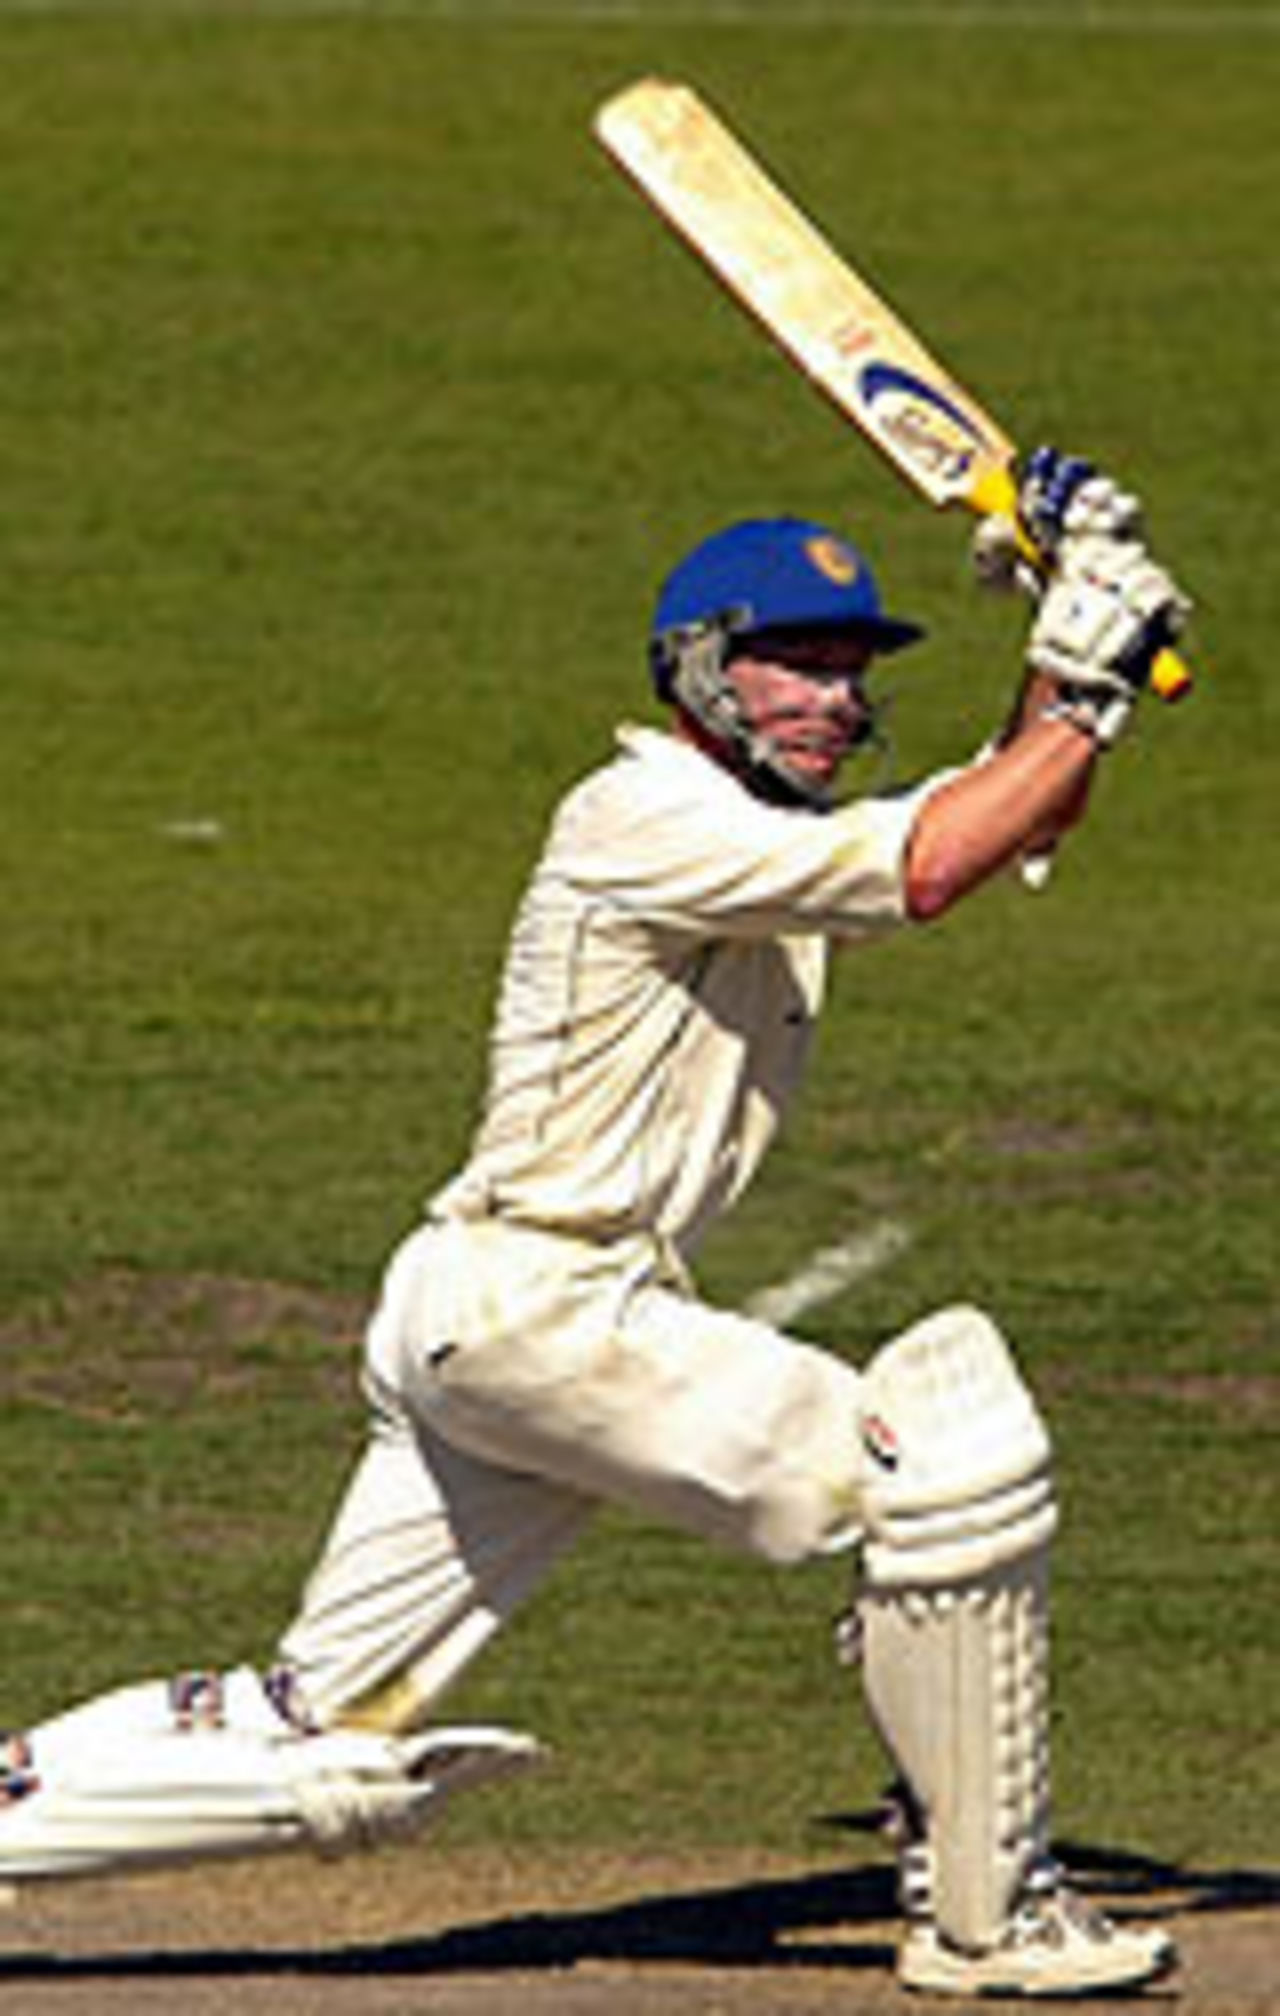 Cade Brown in action against the Indians, Australian PM's XI v Indians, January 28, 2004